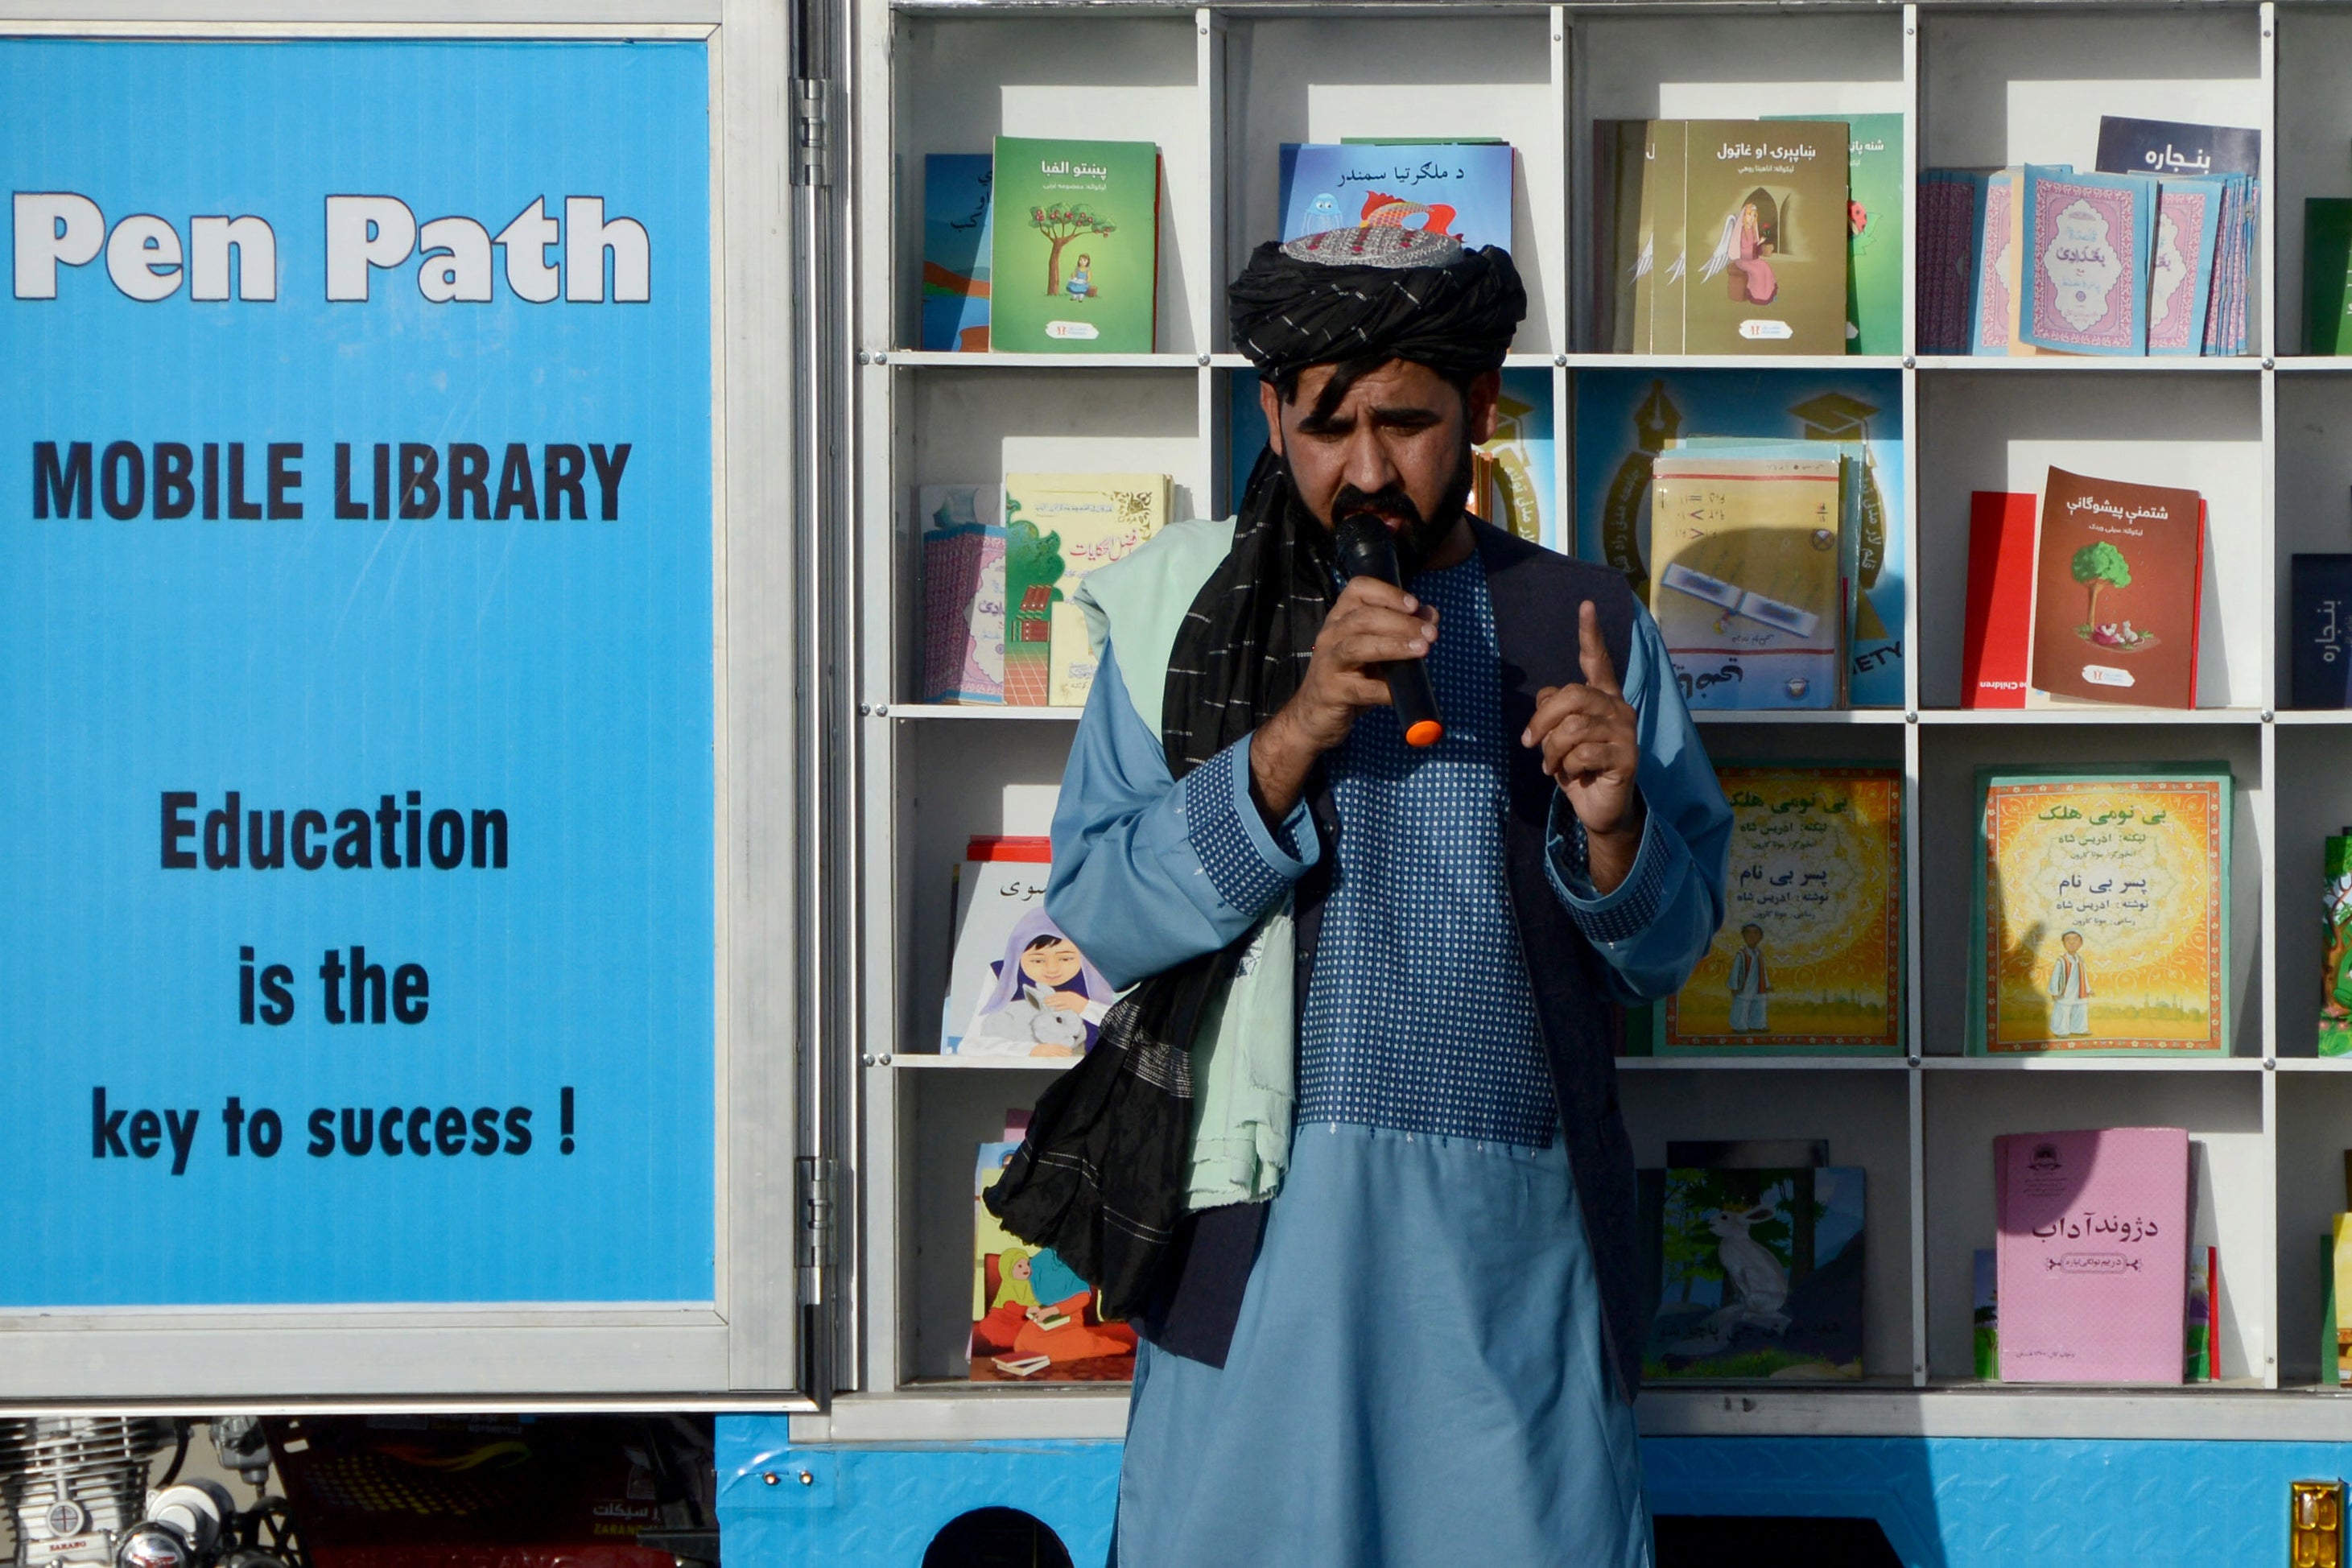 Matiullah Wesa, head of PenPath and advocate for girls’ education in Afghanistan, speaks to children during a class next to his mobile library in Spin Boldak district of Kandahar Province